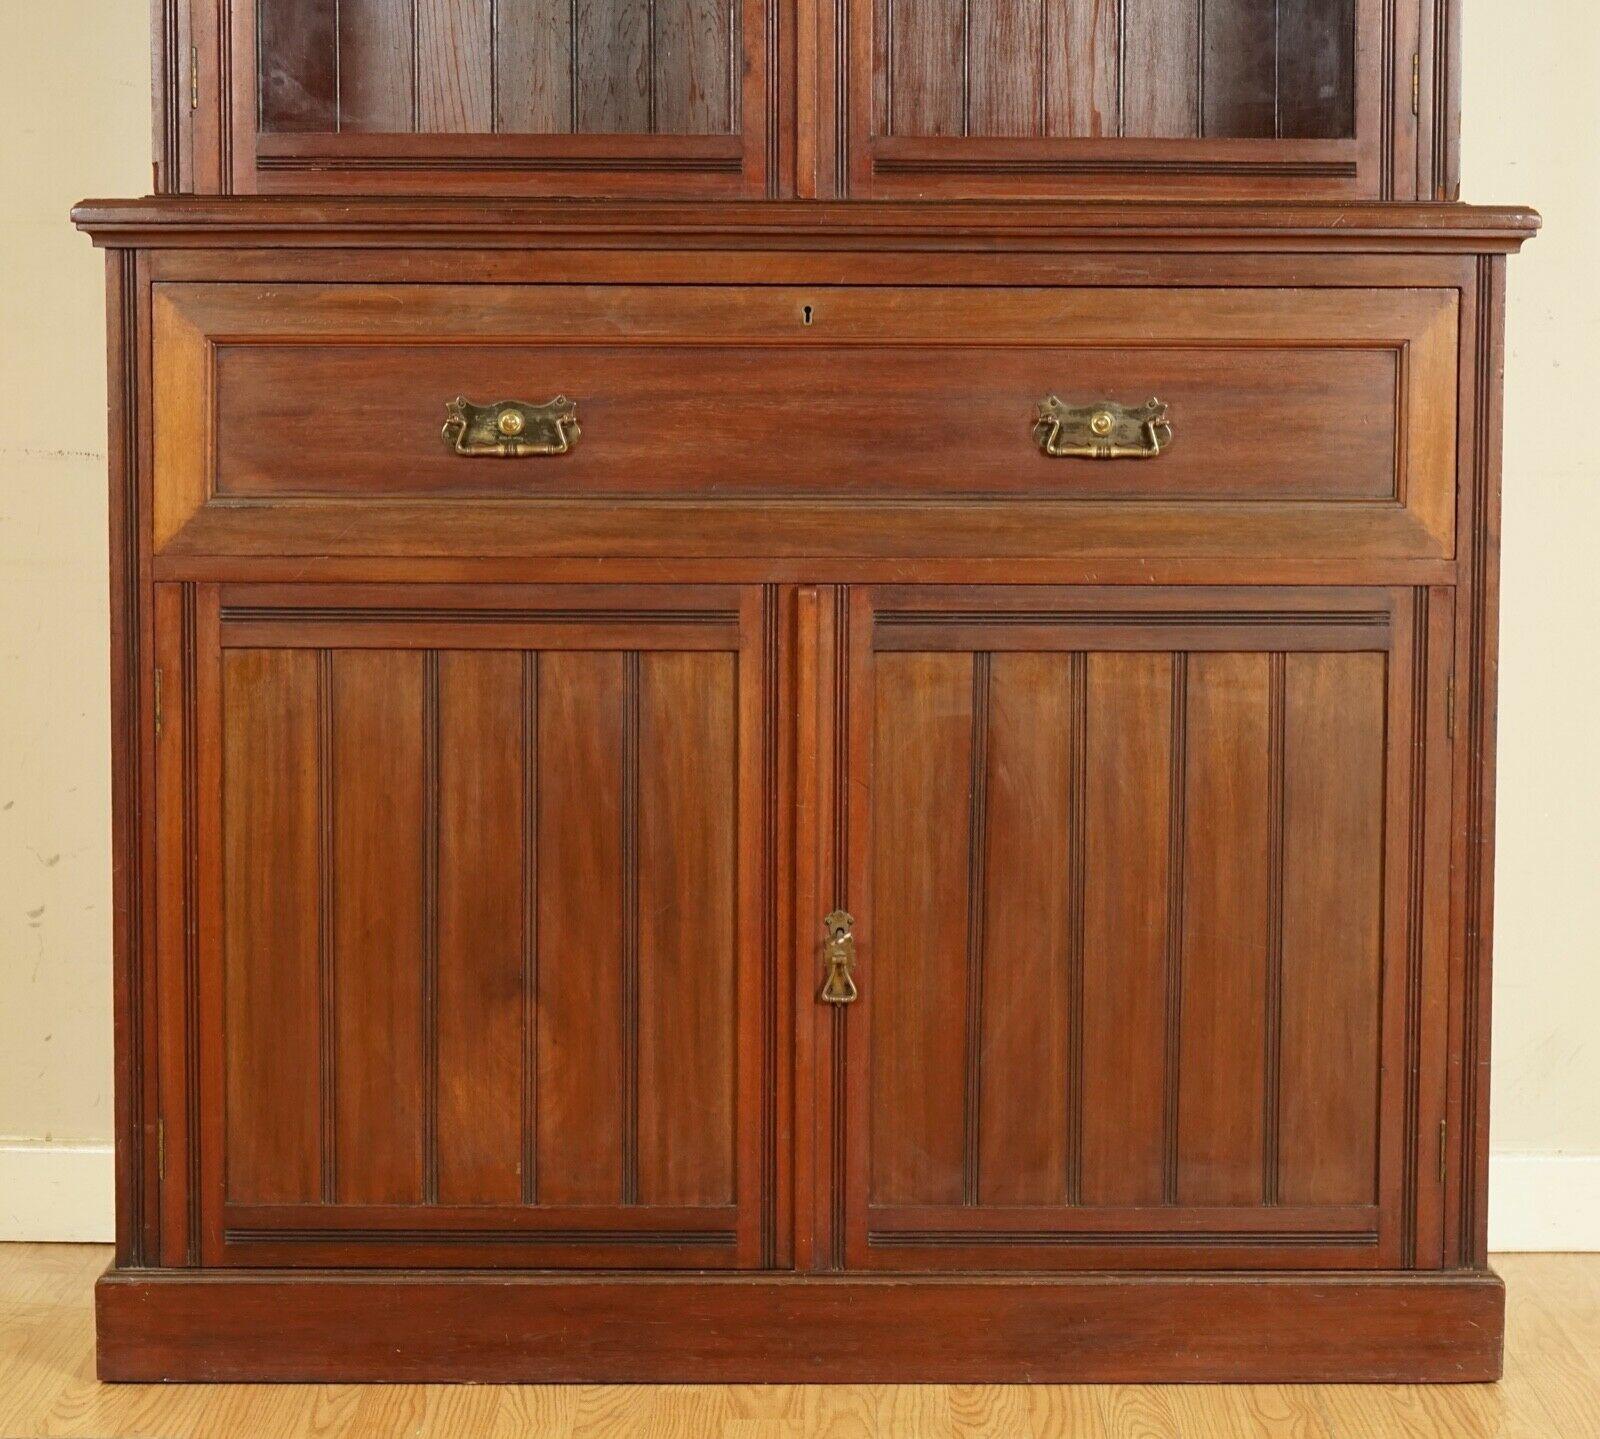 Hand-Crafted circa 1880 Hardwood Library Bookcase Secretaire Desk Dark Blue Leather Surface